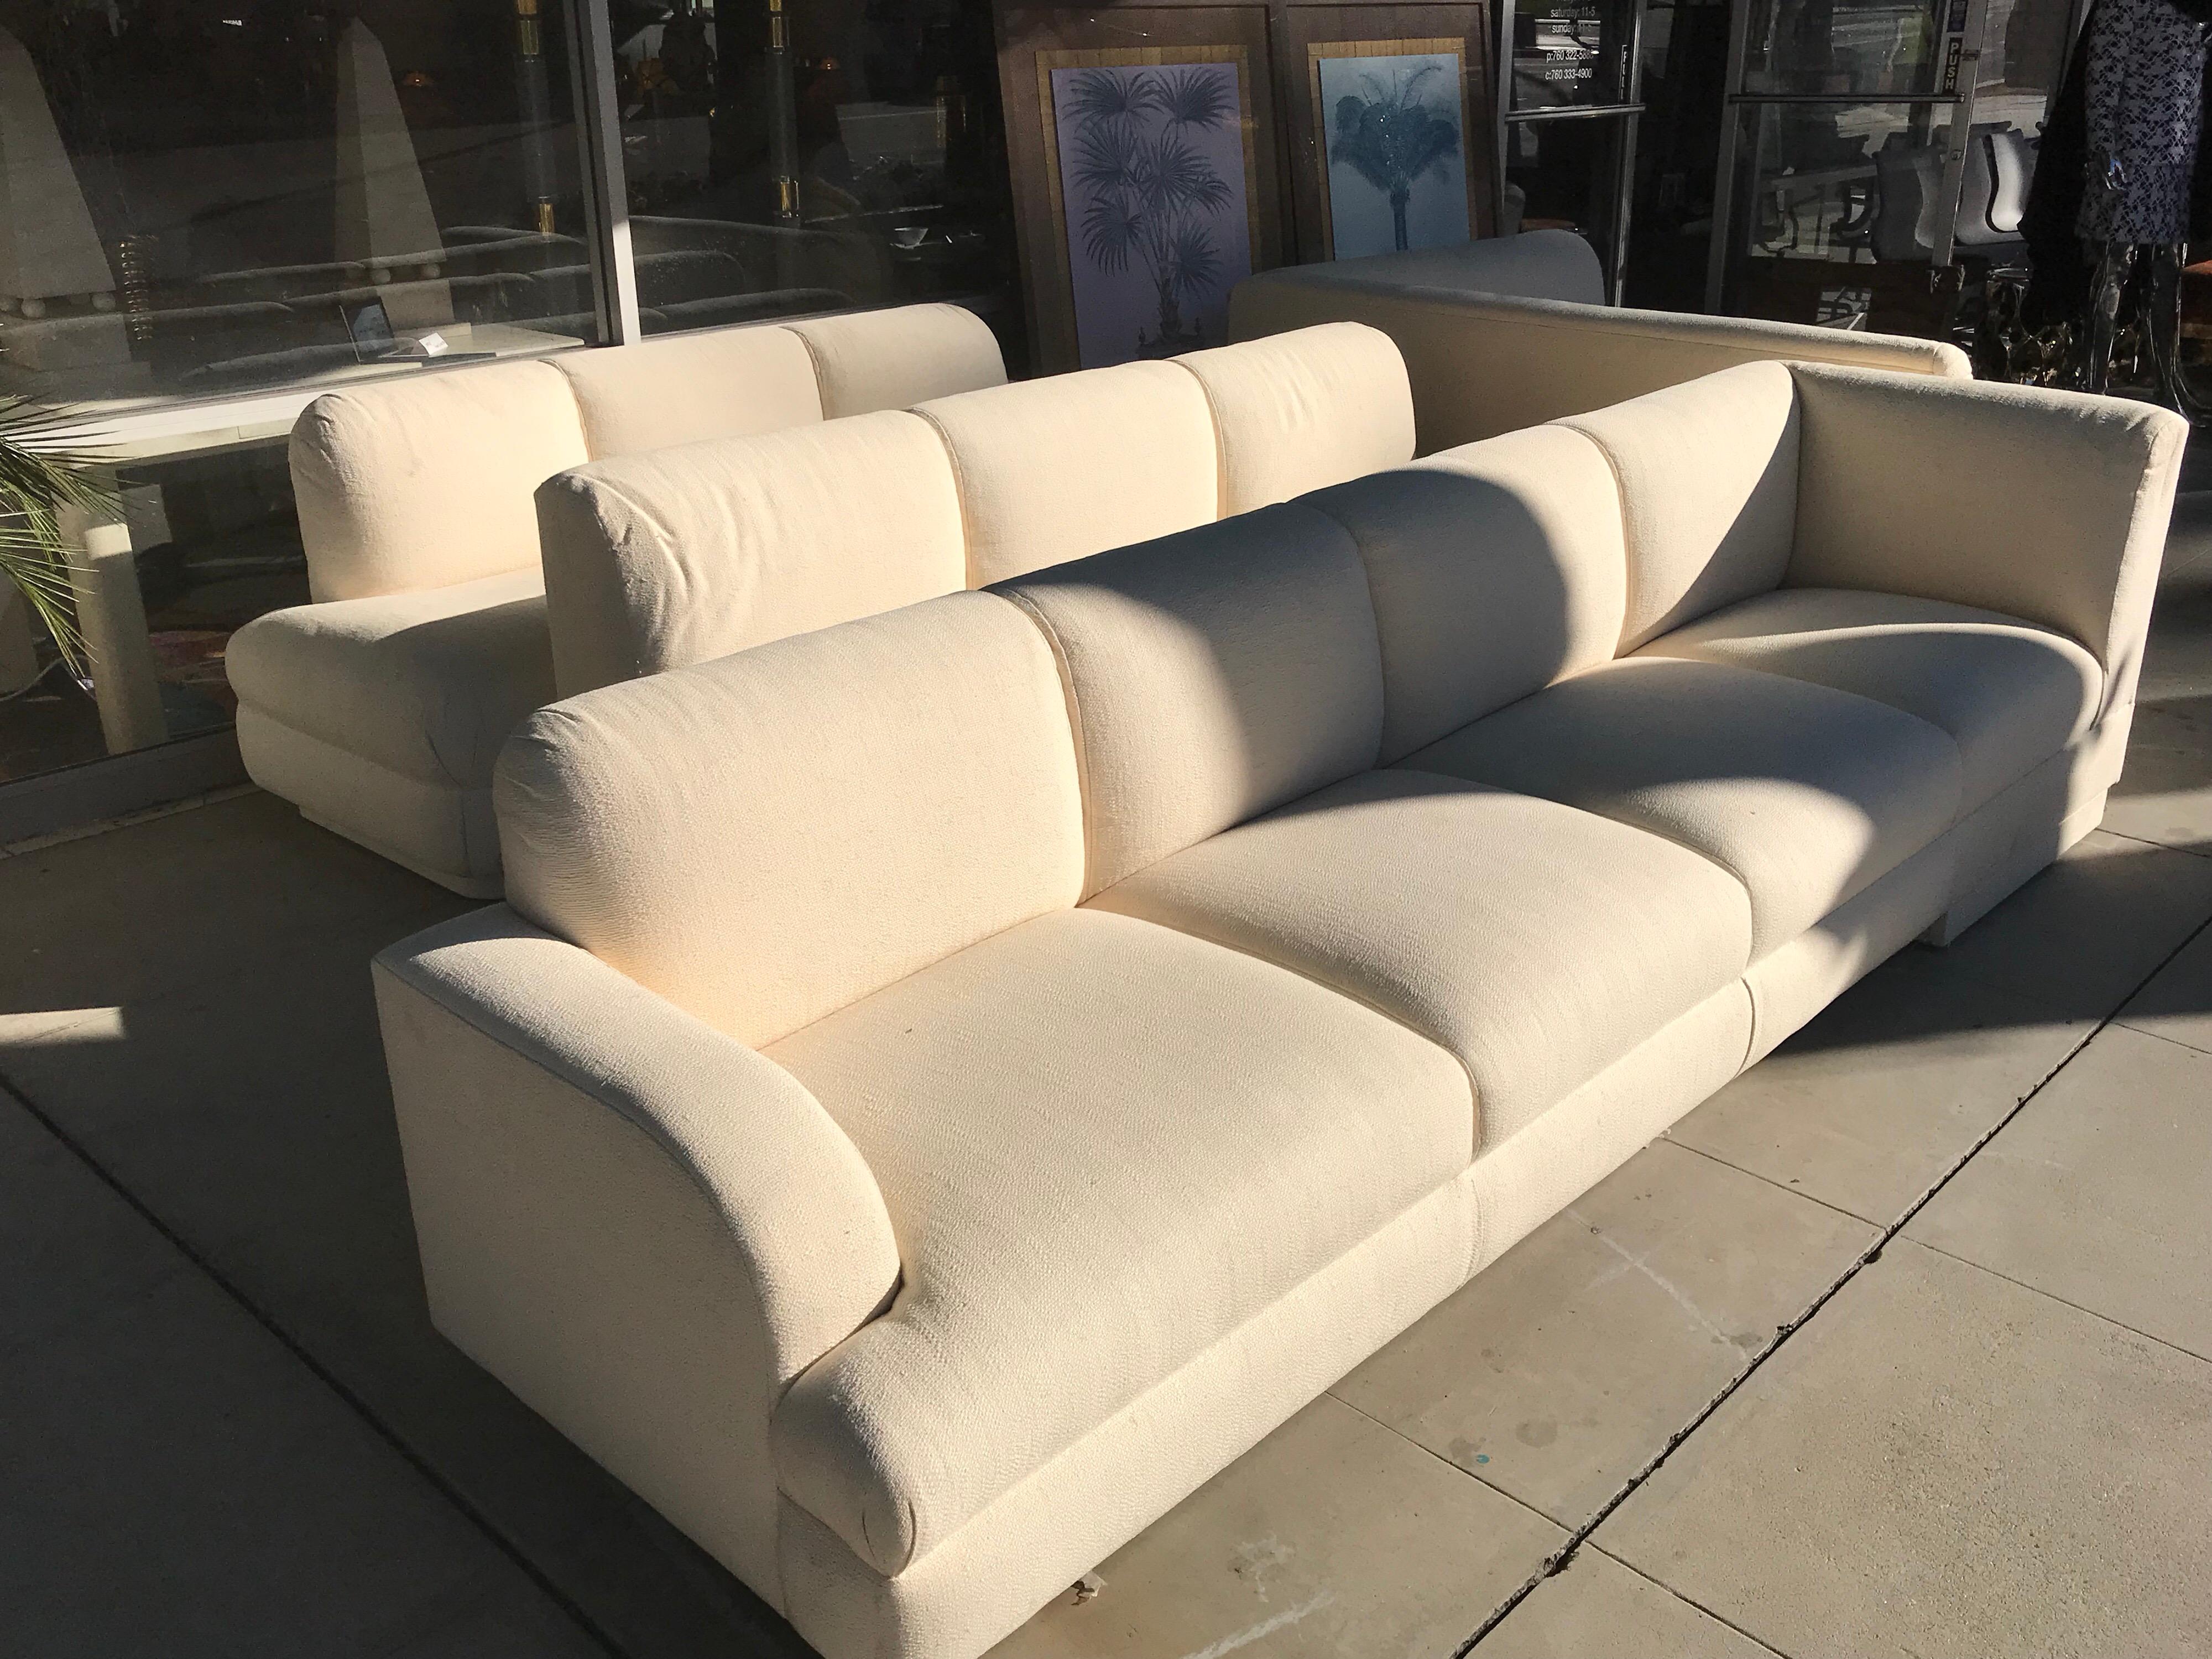 American Vintage Modern Steve Chase L-Shape Sofa Made by A. Rudin